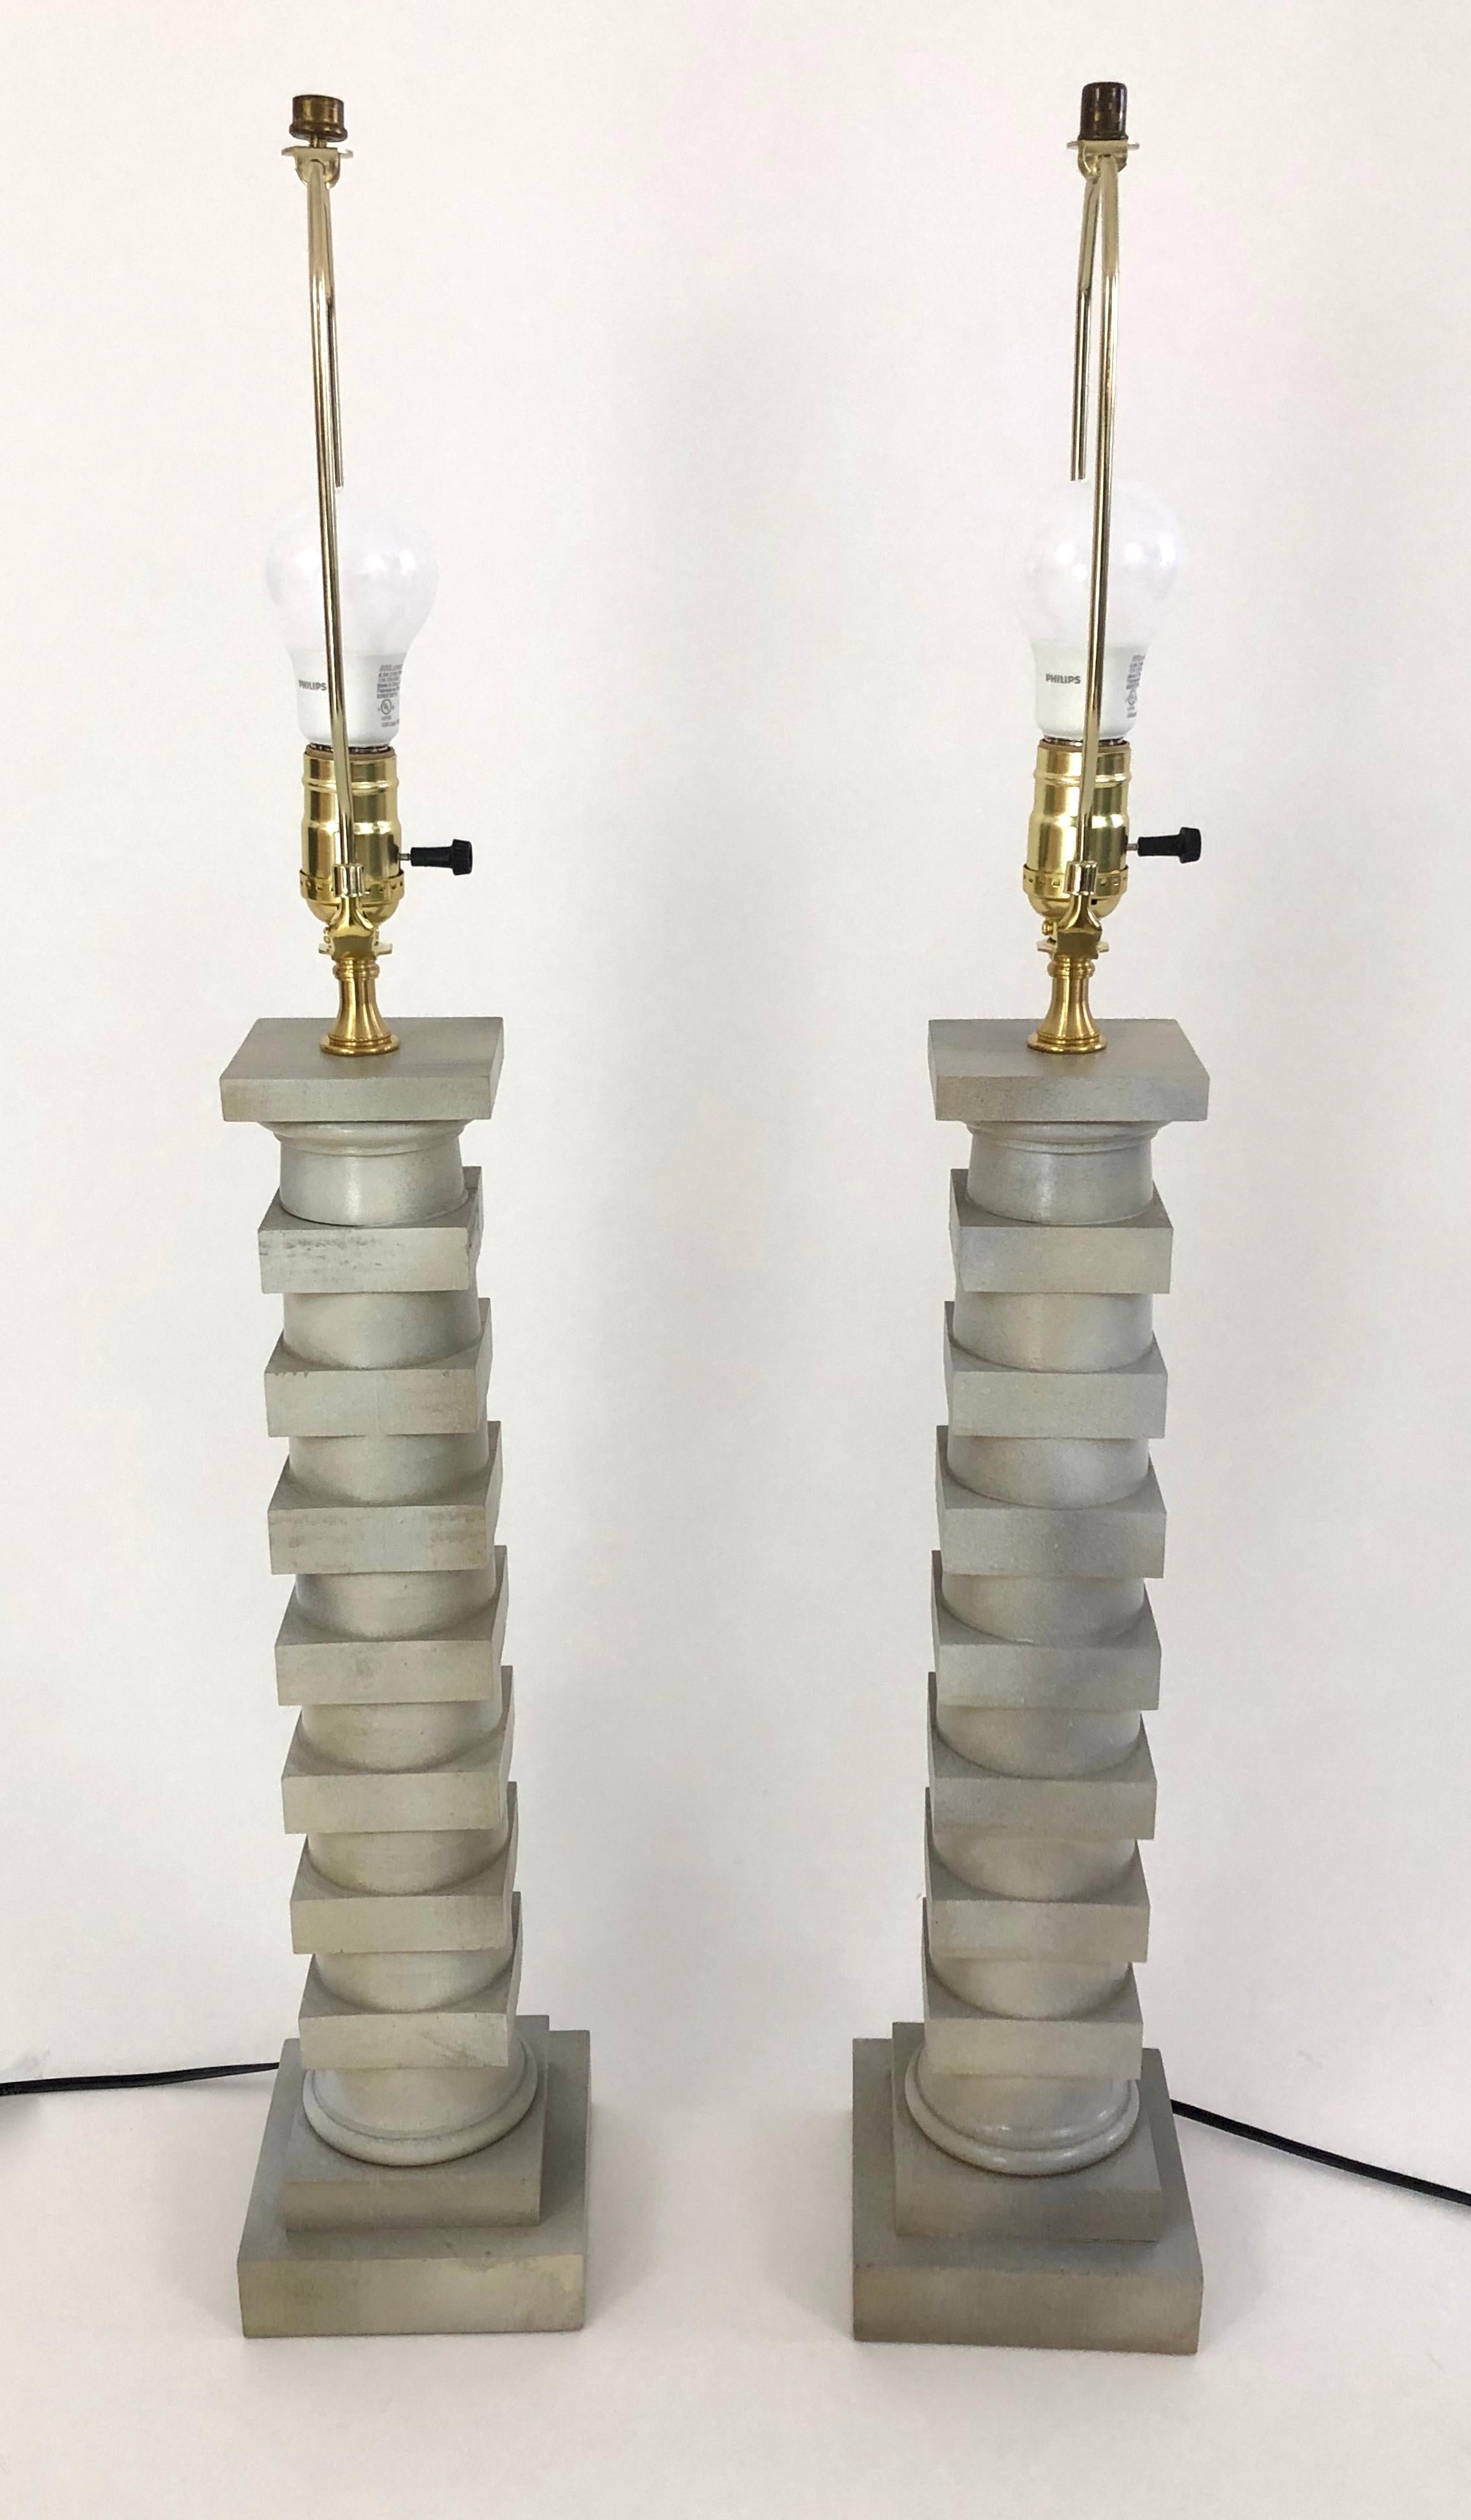 A pair of carved wood lamps in the form of columns, designed by Robert Altman, the cylindrical and stacked square design inspired by the work of French neoclassical architect LeDoux, in a grey faux stone finish. Shades optional.
Dimensions:
Overall